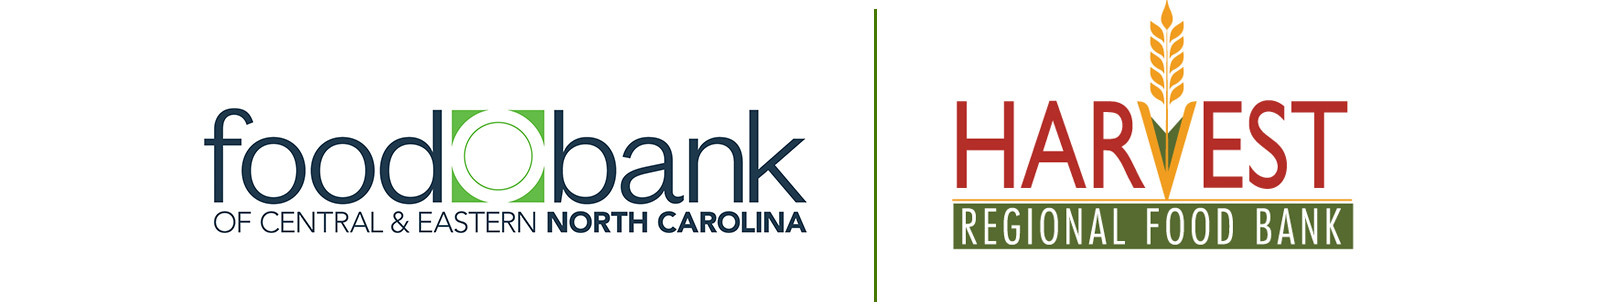 food bank of central and eastern North Carolia, and harvest regional foodbank logos